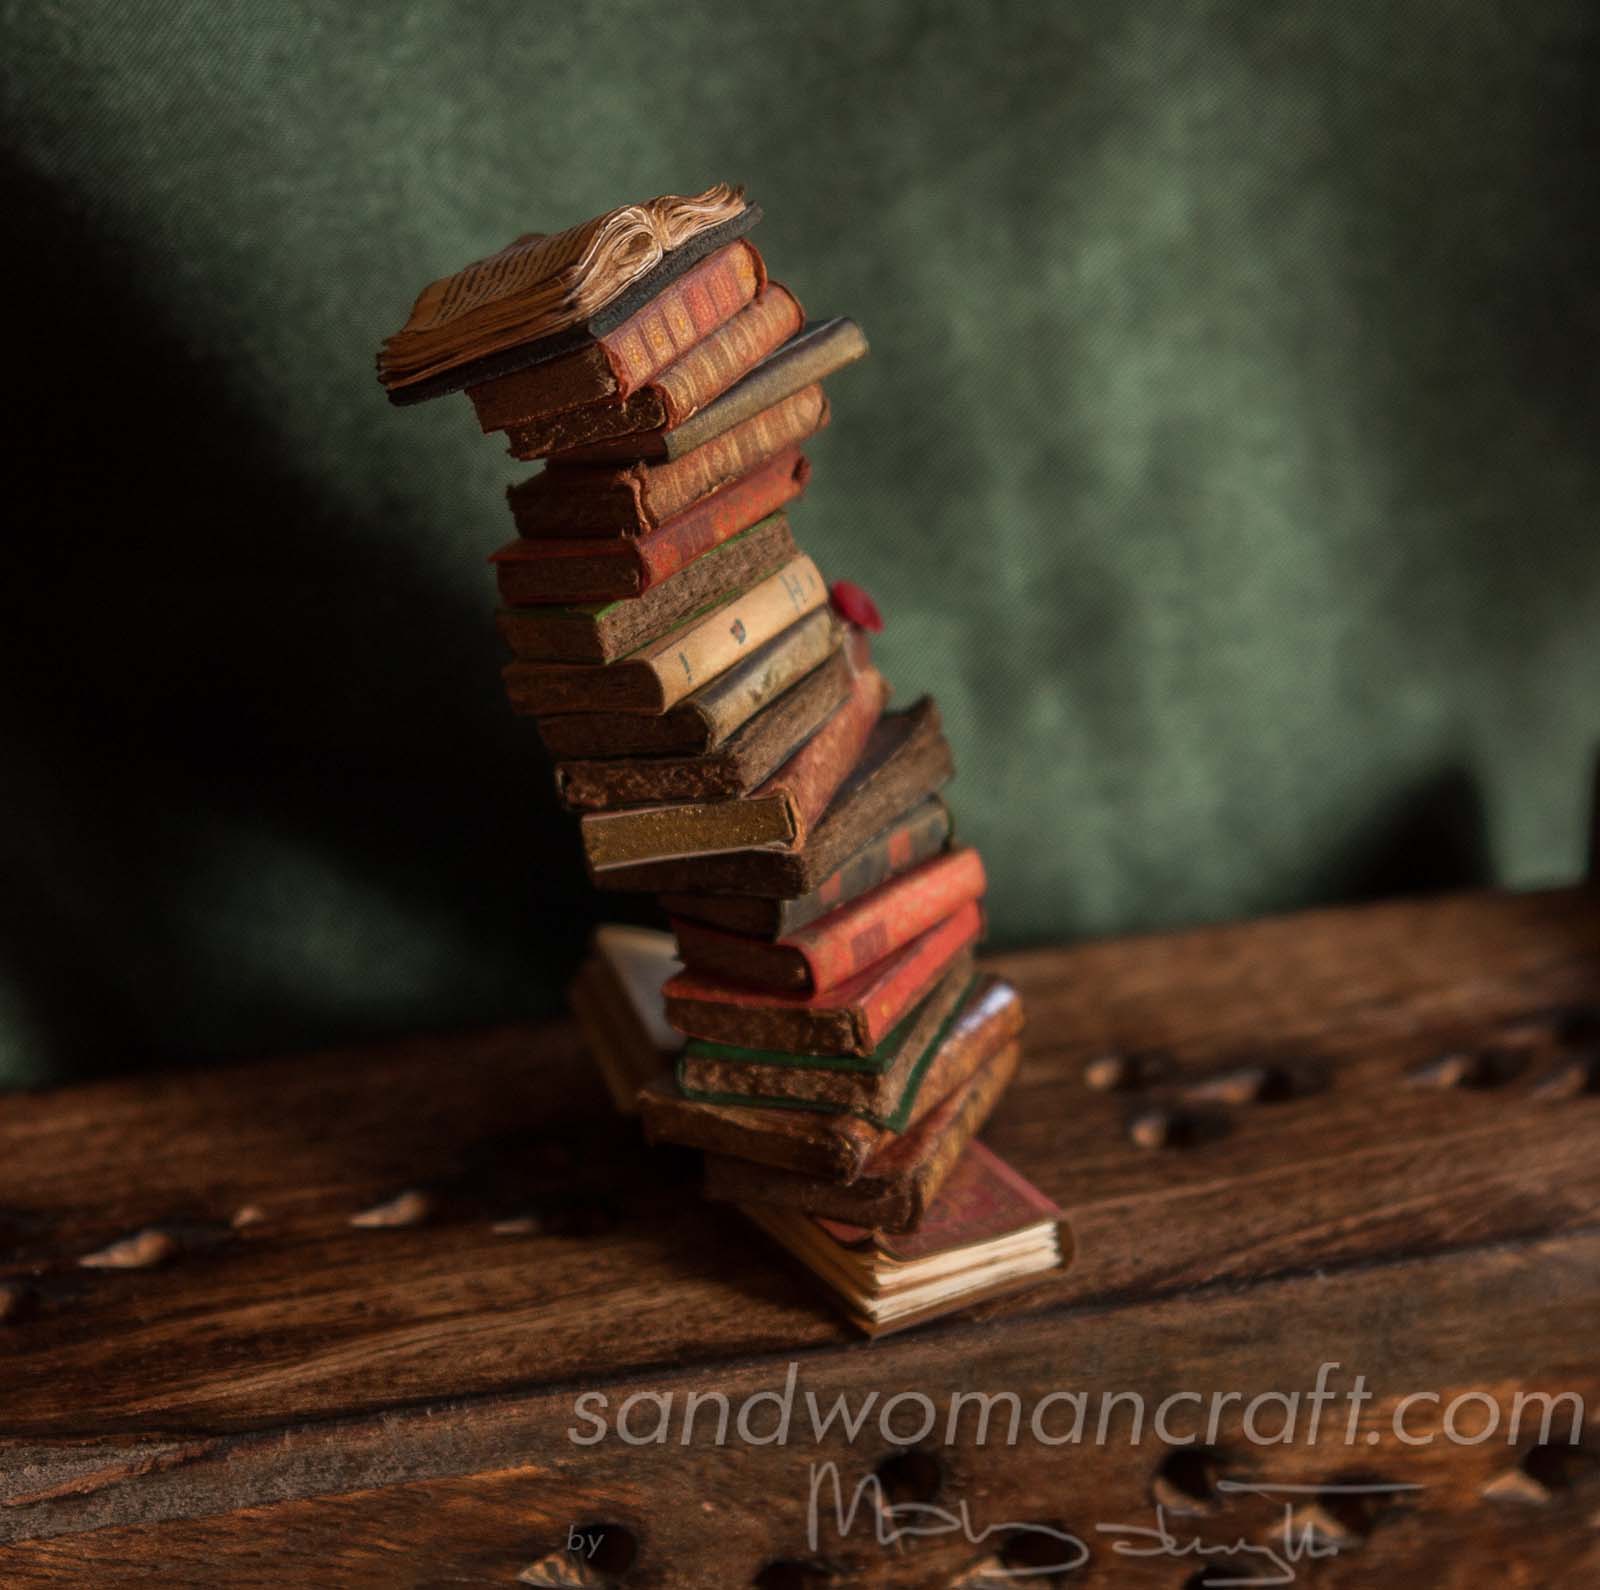 Pile/ stack/ set of 22 miniature books + tiny potion in 1:12 scale. Library, wizard, witch, magic setting.